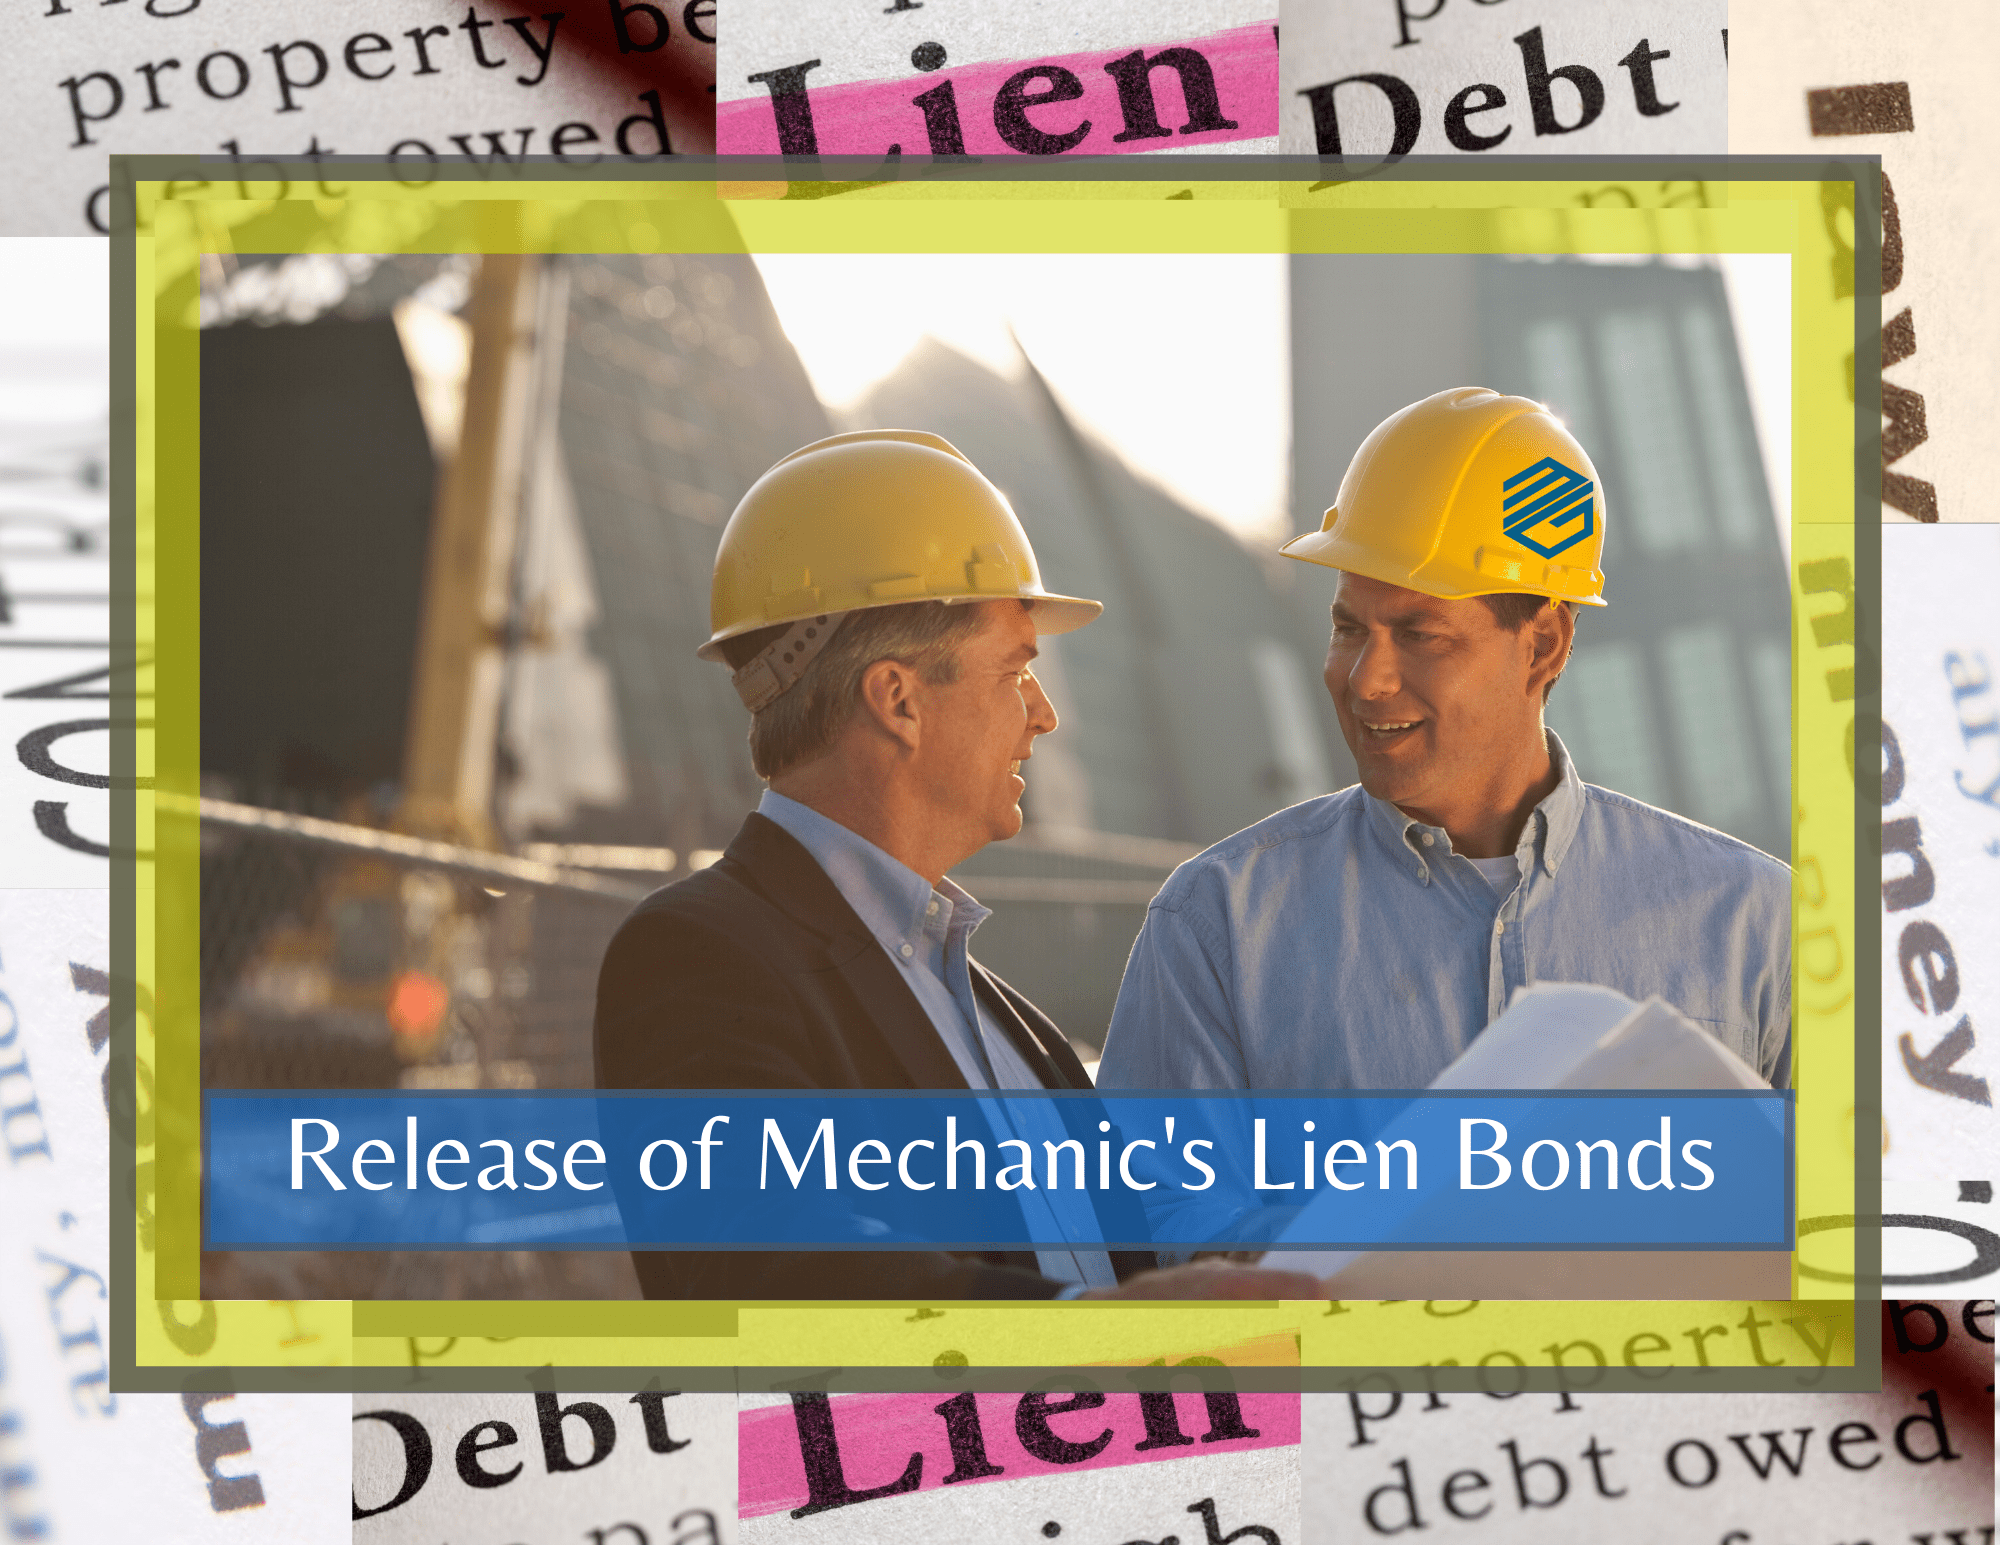 Release of Mechanic's Lien Bonds. This is a picture of two men in hardhats. The background is clippings of "lien", "property", "debt", "law". It has a bright yellow frame aroud the picture.